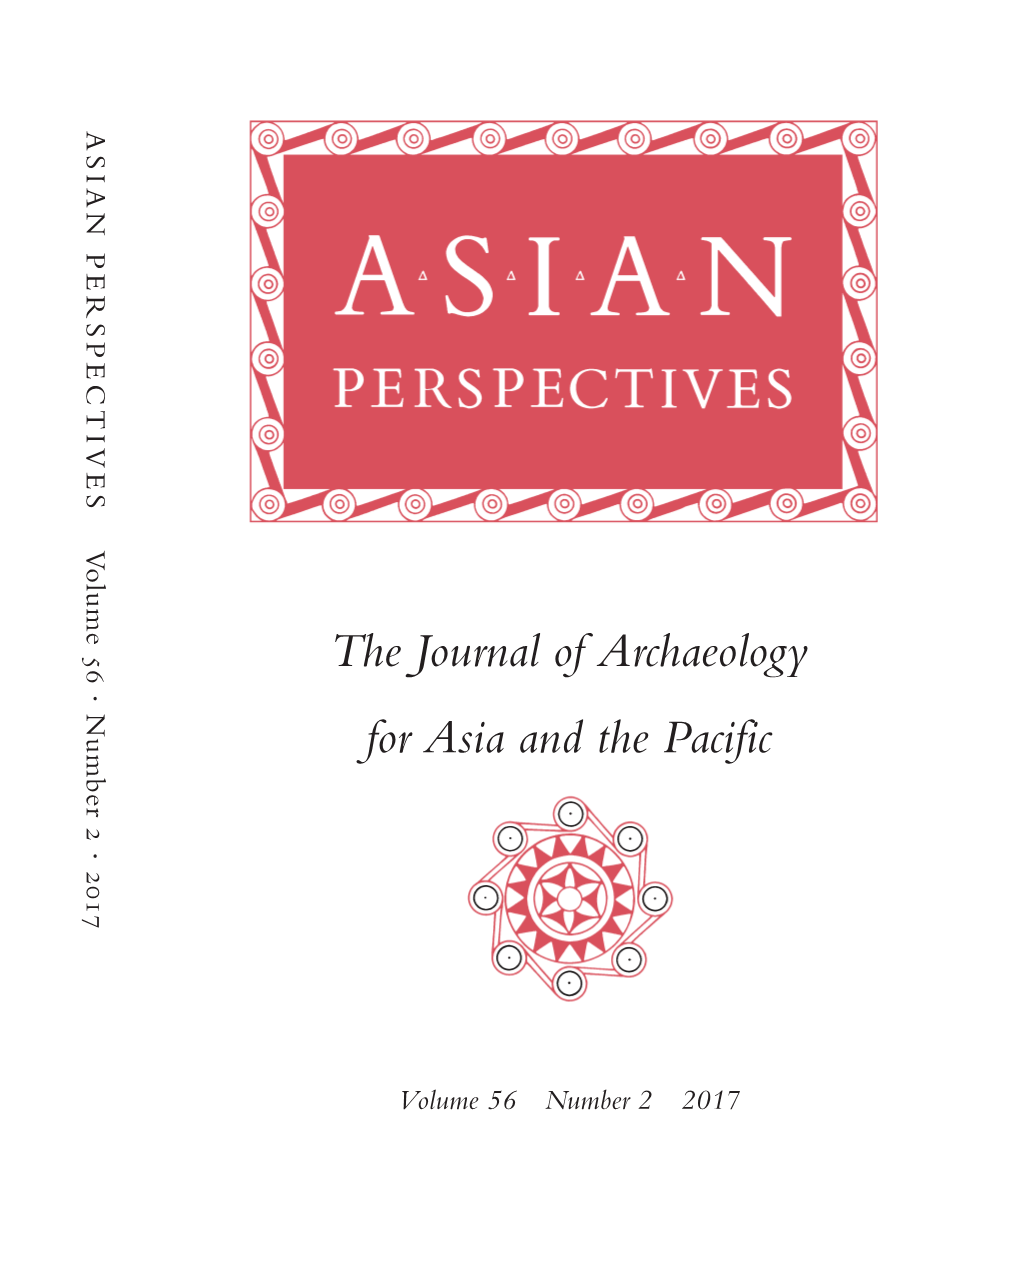 The Journal of Archaeology for Asia and the Pacific